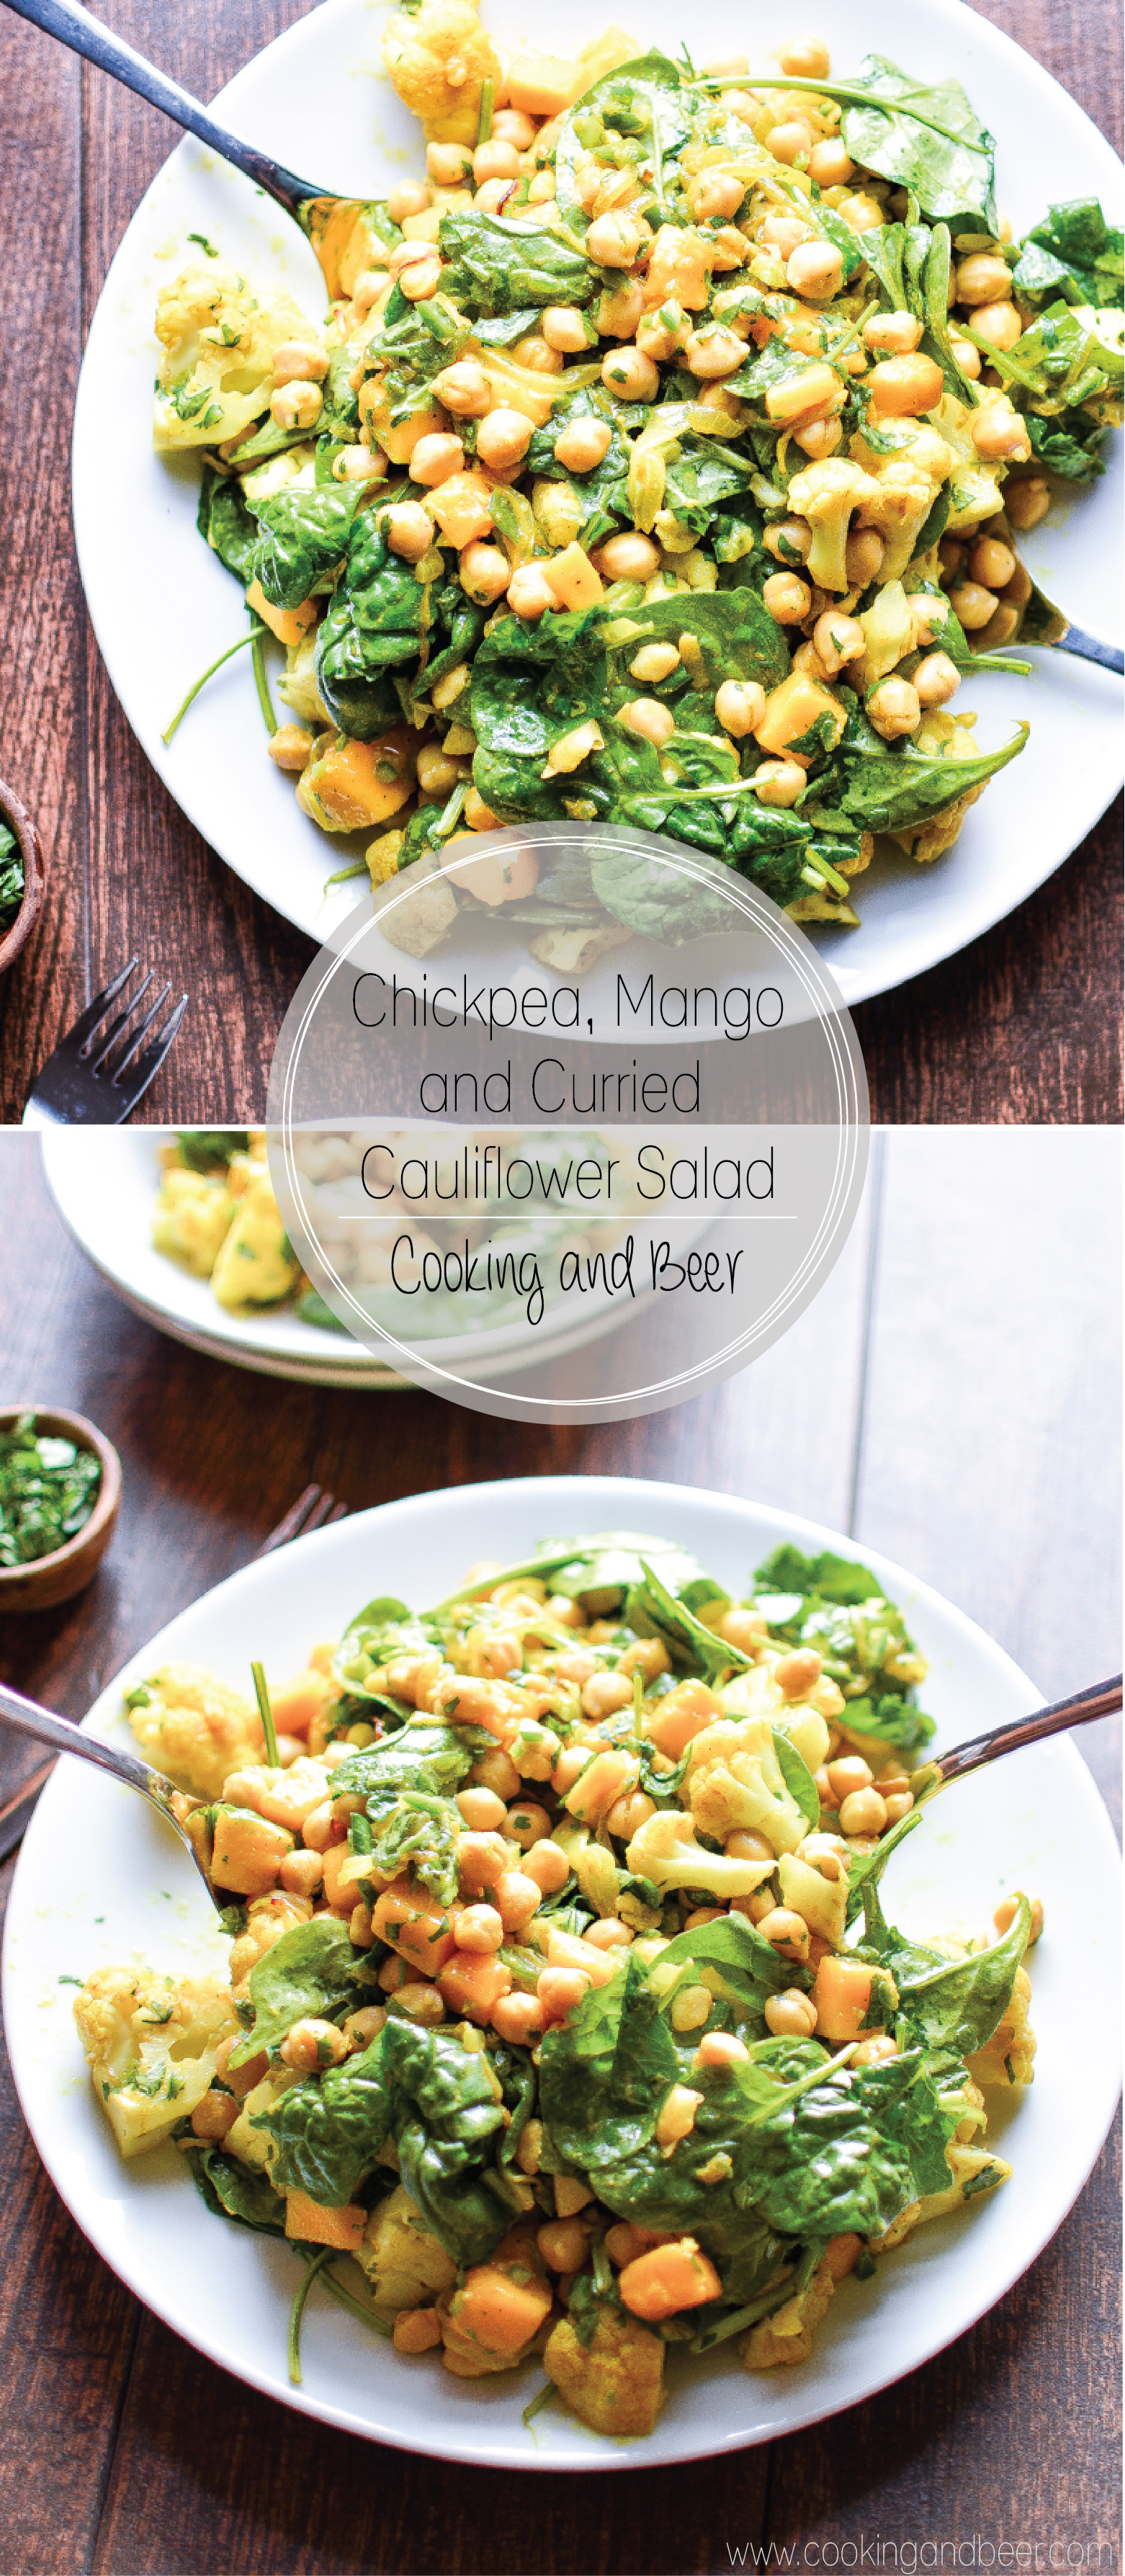 Chickpea, Mango and Curried Cauliflower Salad: a refreshing and delicious appetizer or dinner recipe! | www.cookingandbeer.com